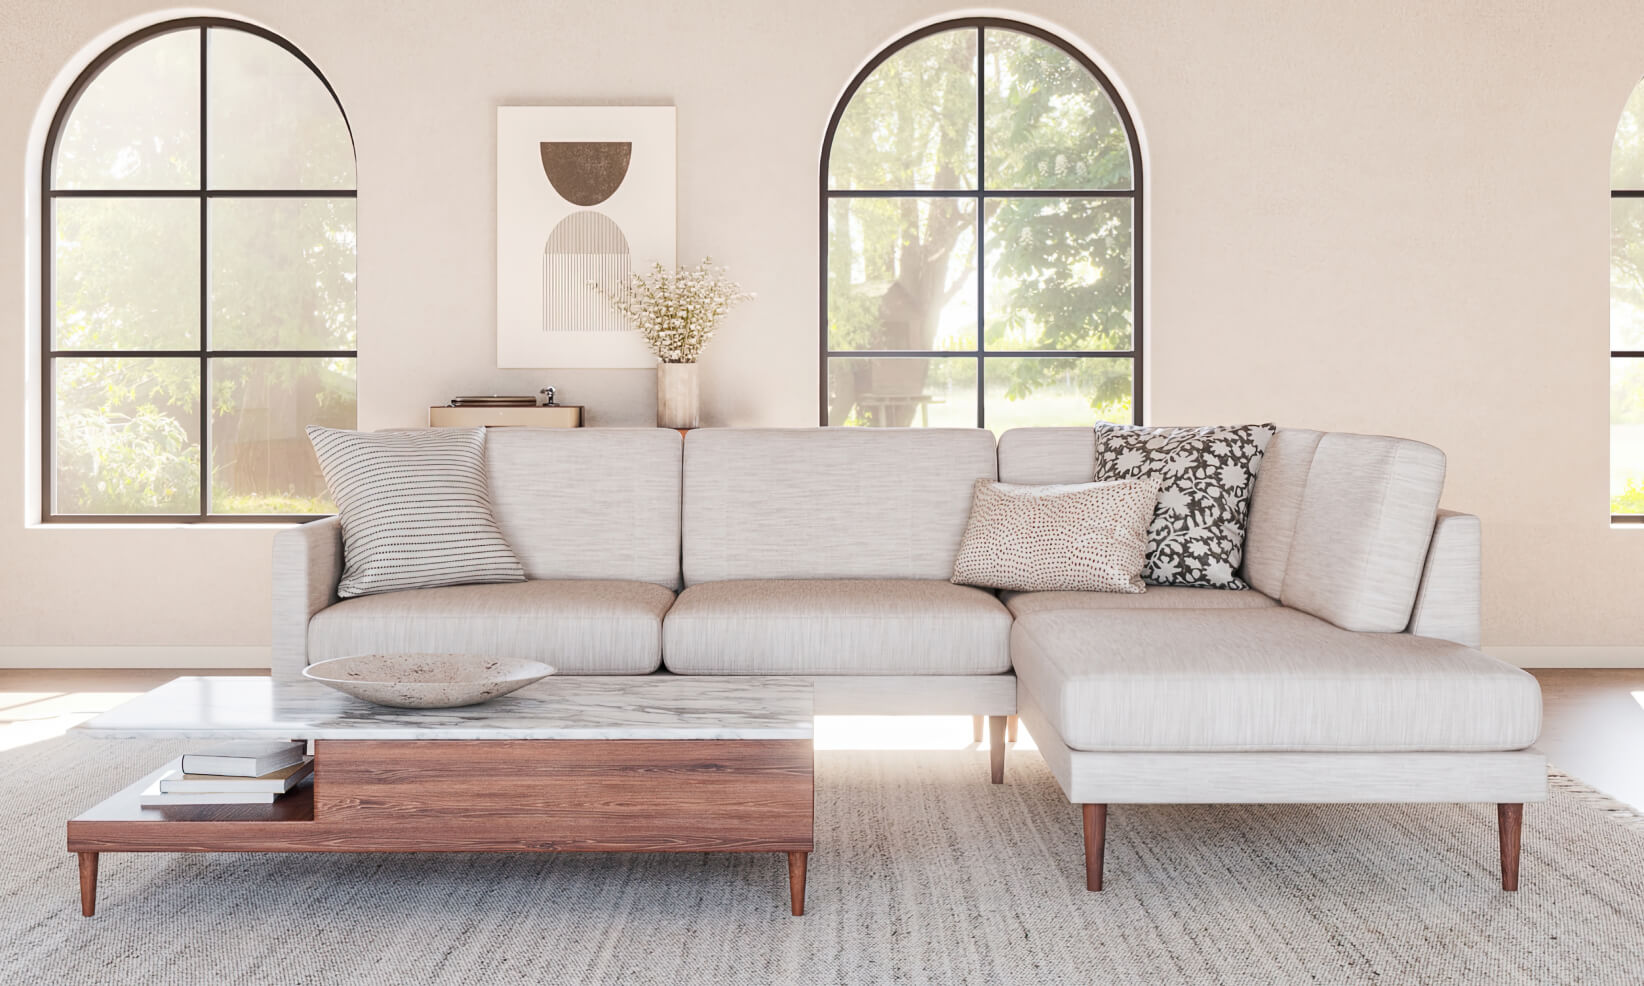 Lala Bumper Sectional in light beige fabric